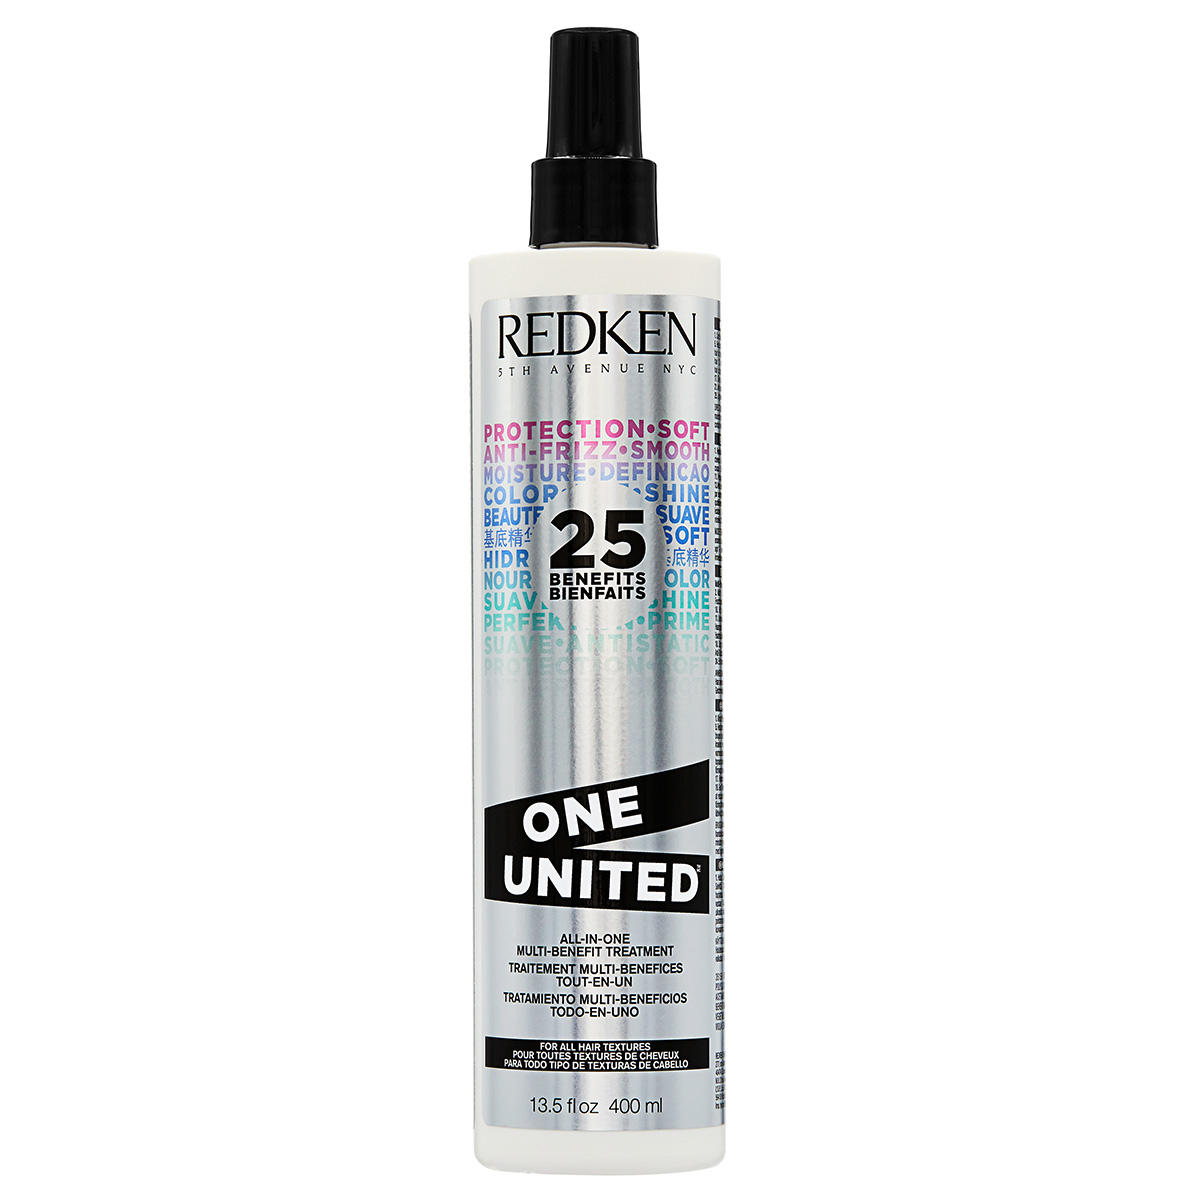 Redken One United All-In-One Multi-Benefit Treatment 400 ml - 1